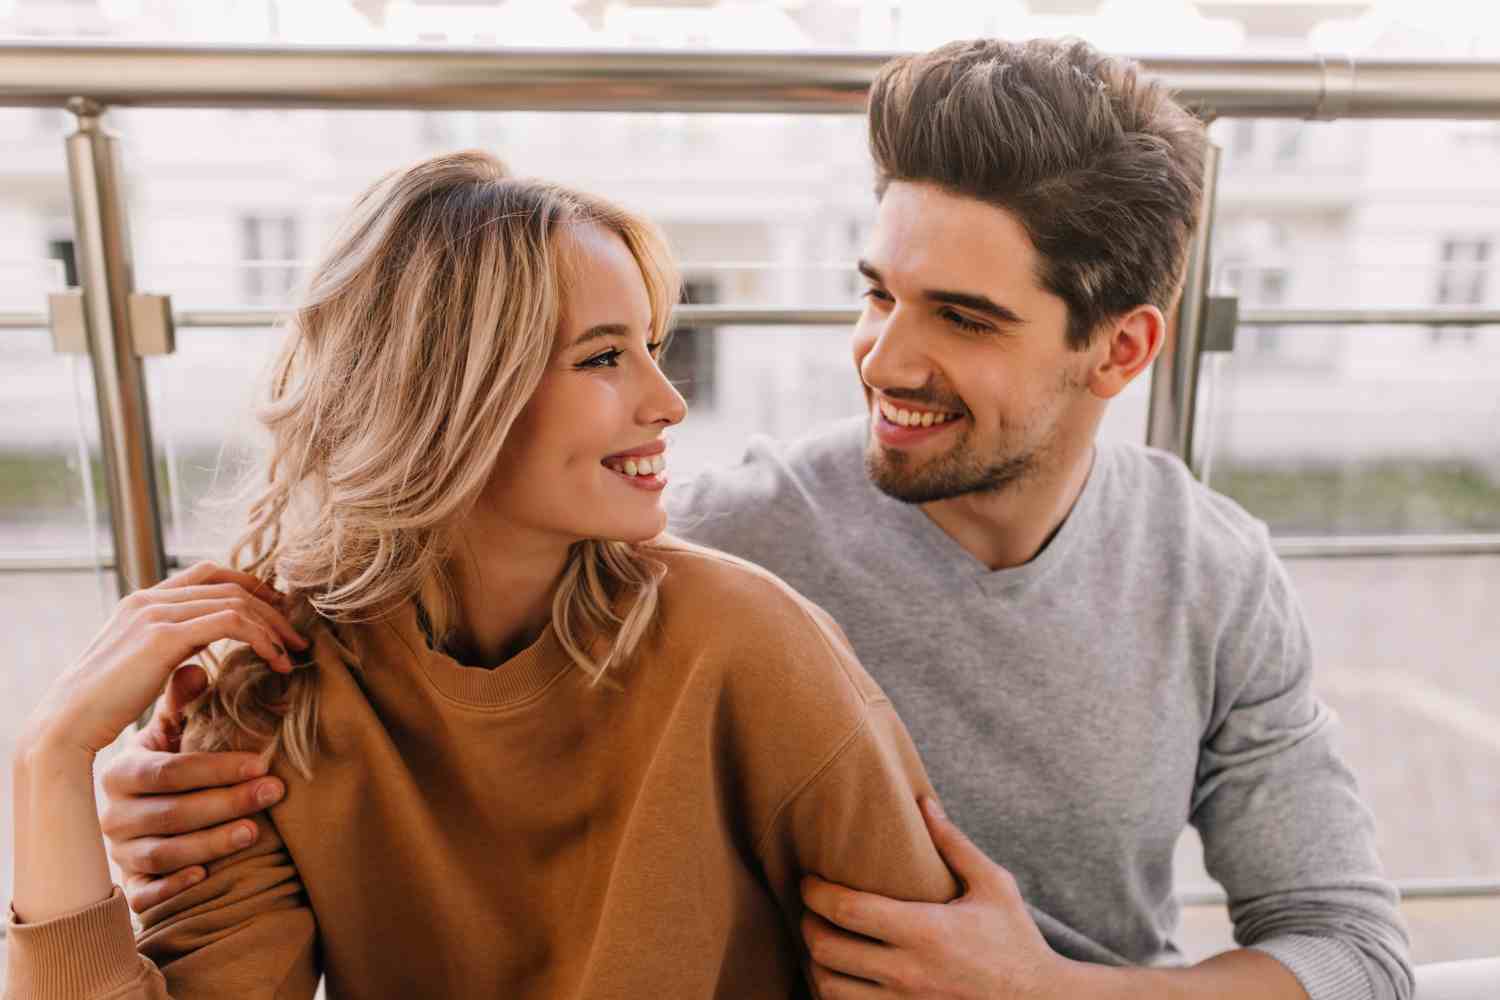 glad guy embracing girlfriend portrait caucasian couple smiling each other